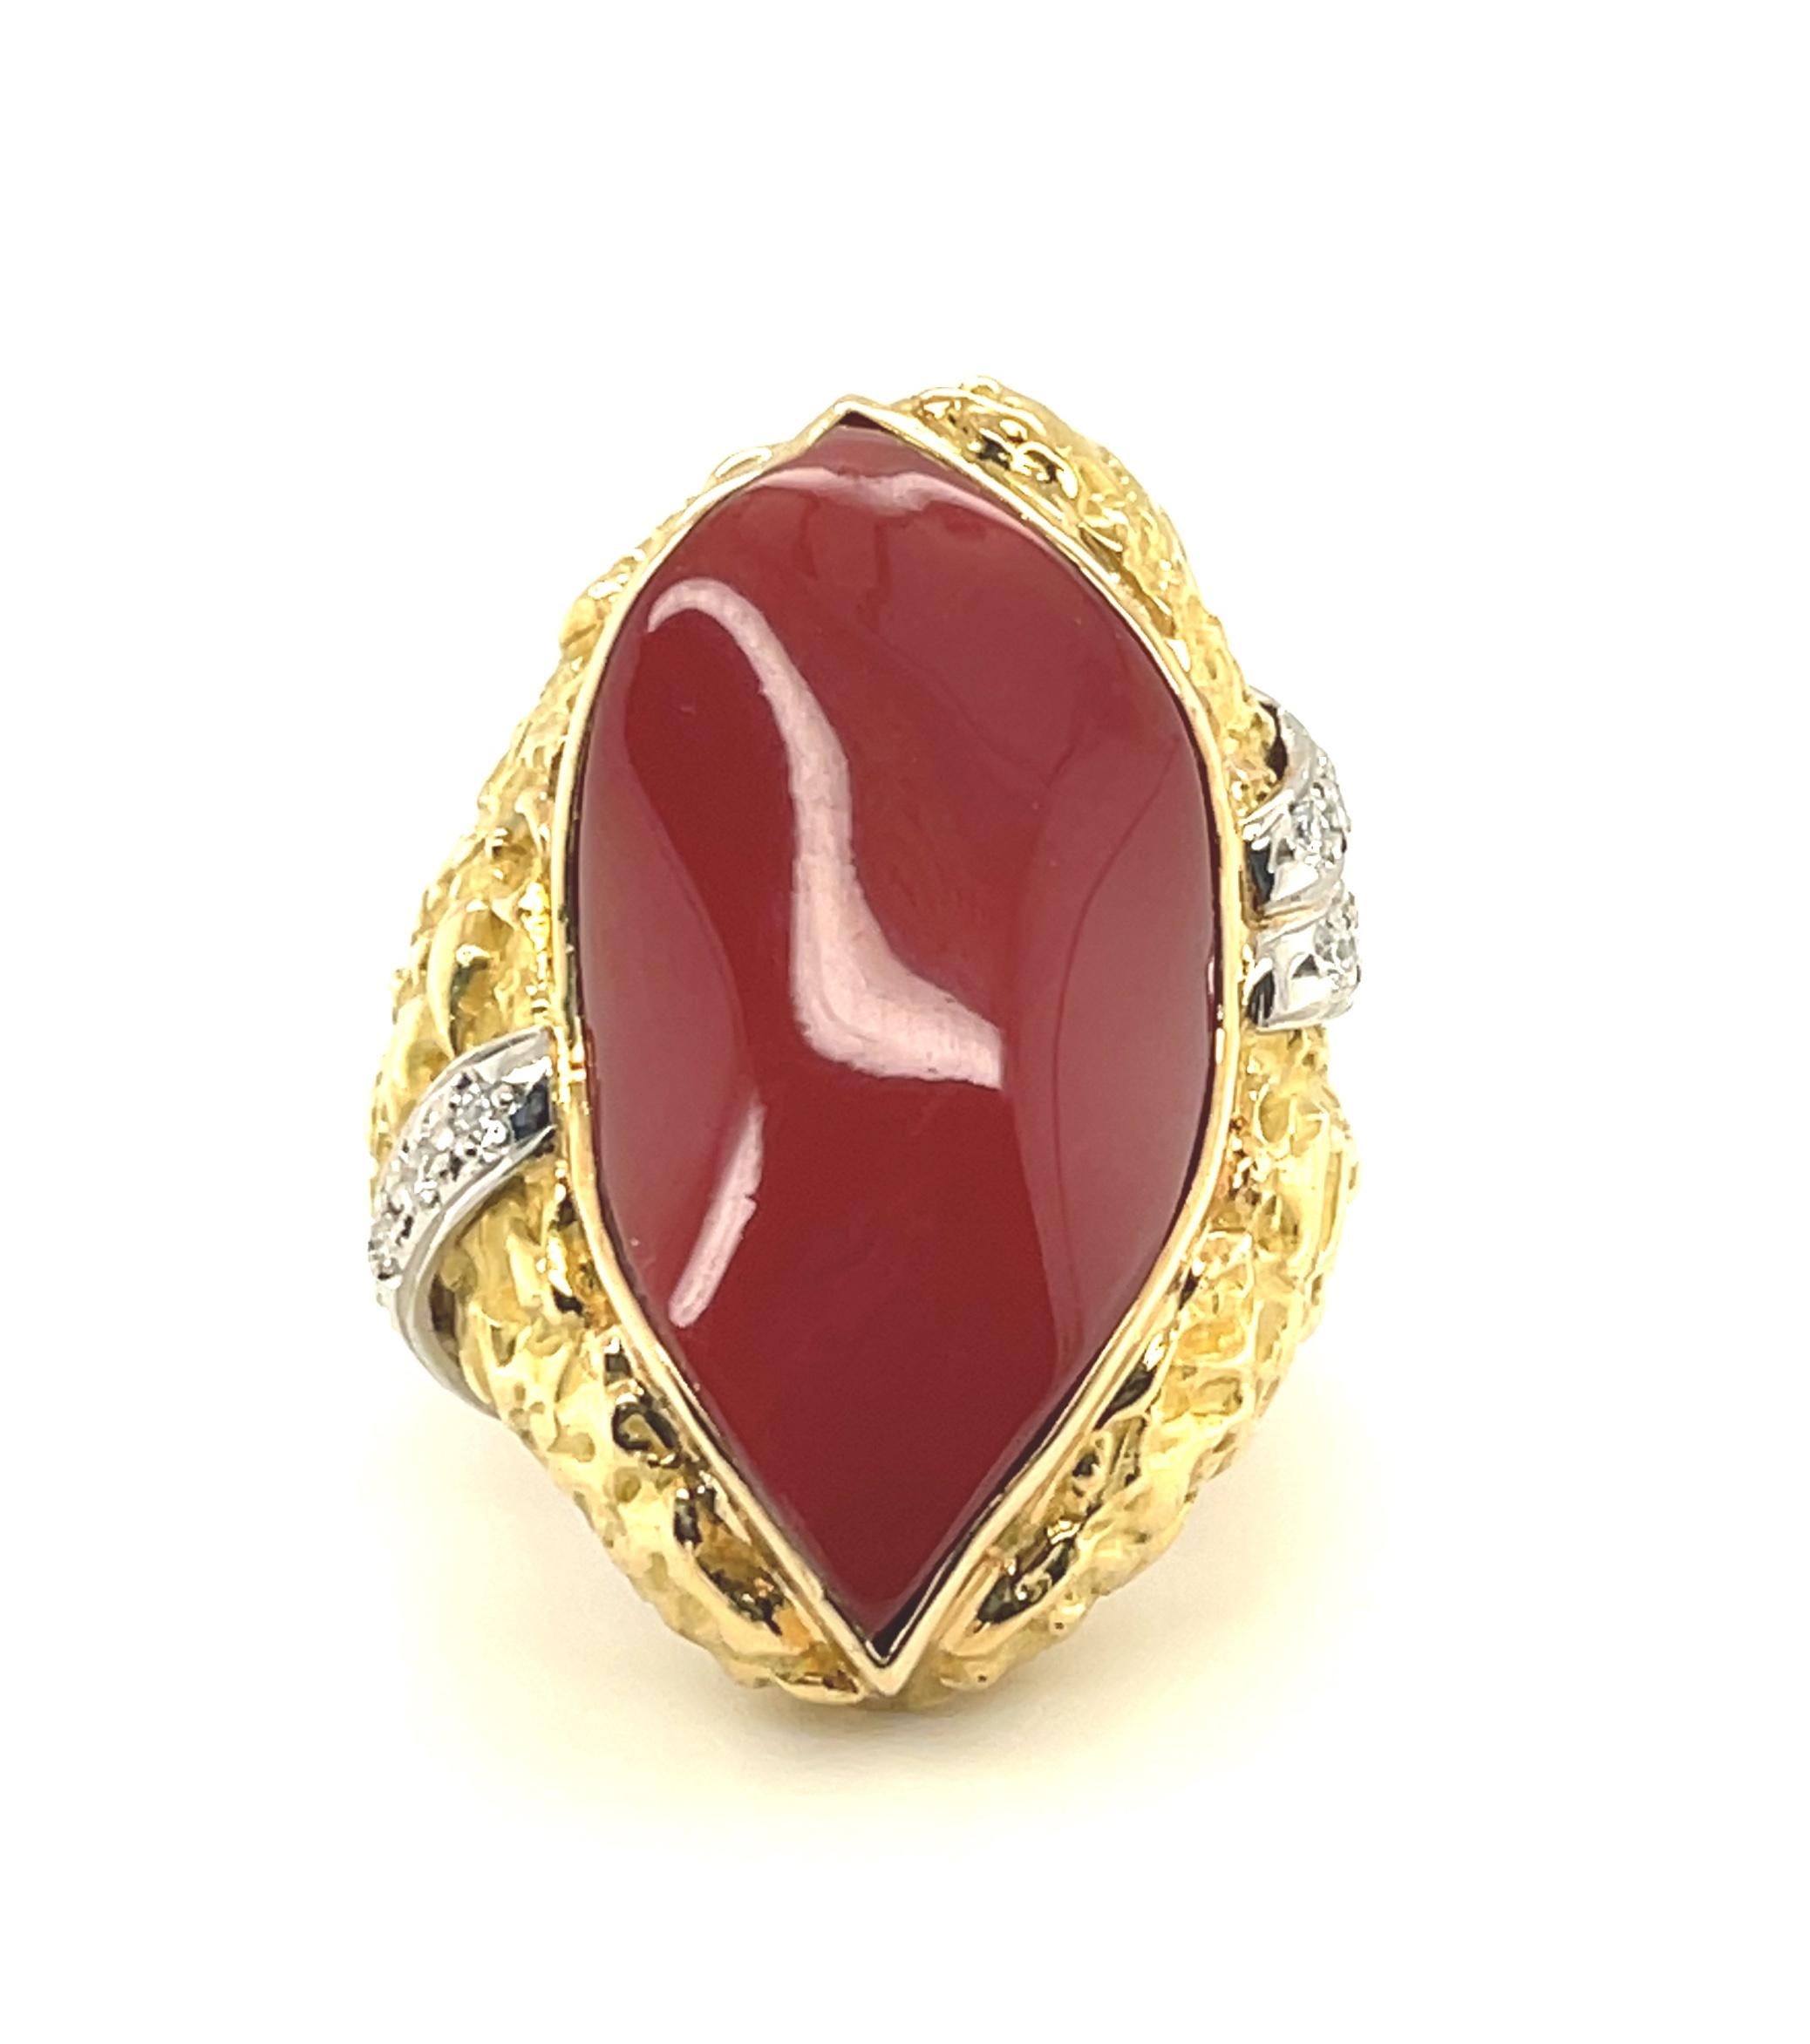 This eye-catching red coral and diamond ring is perfect for someone who is ready to make a statement! The center coral is a freeform leaf shape measuring approximately 1-1/8 in length x 5/8